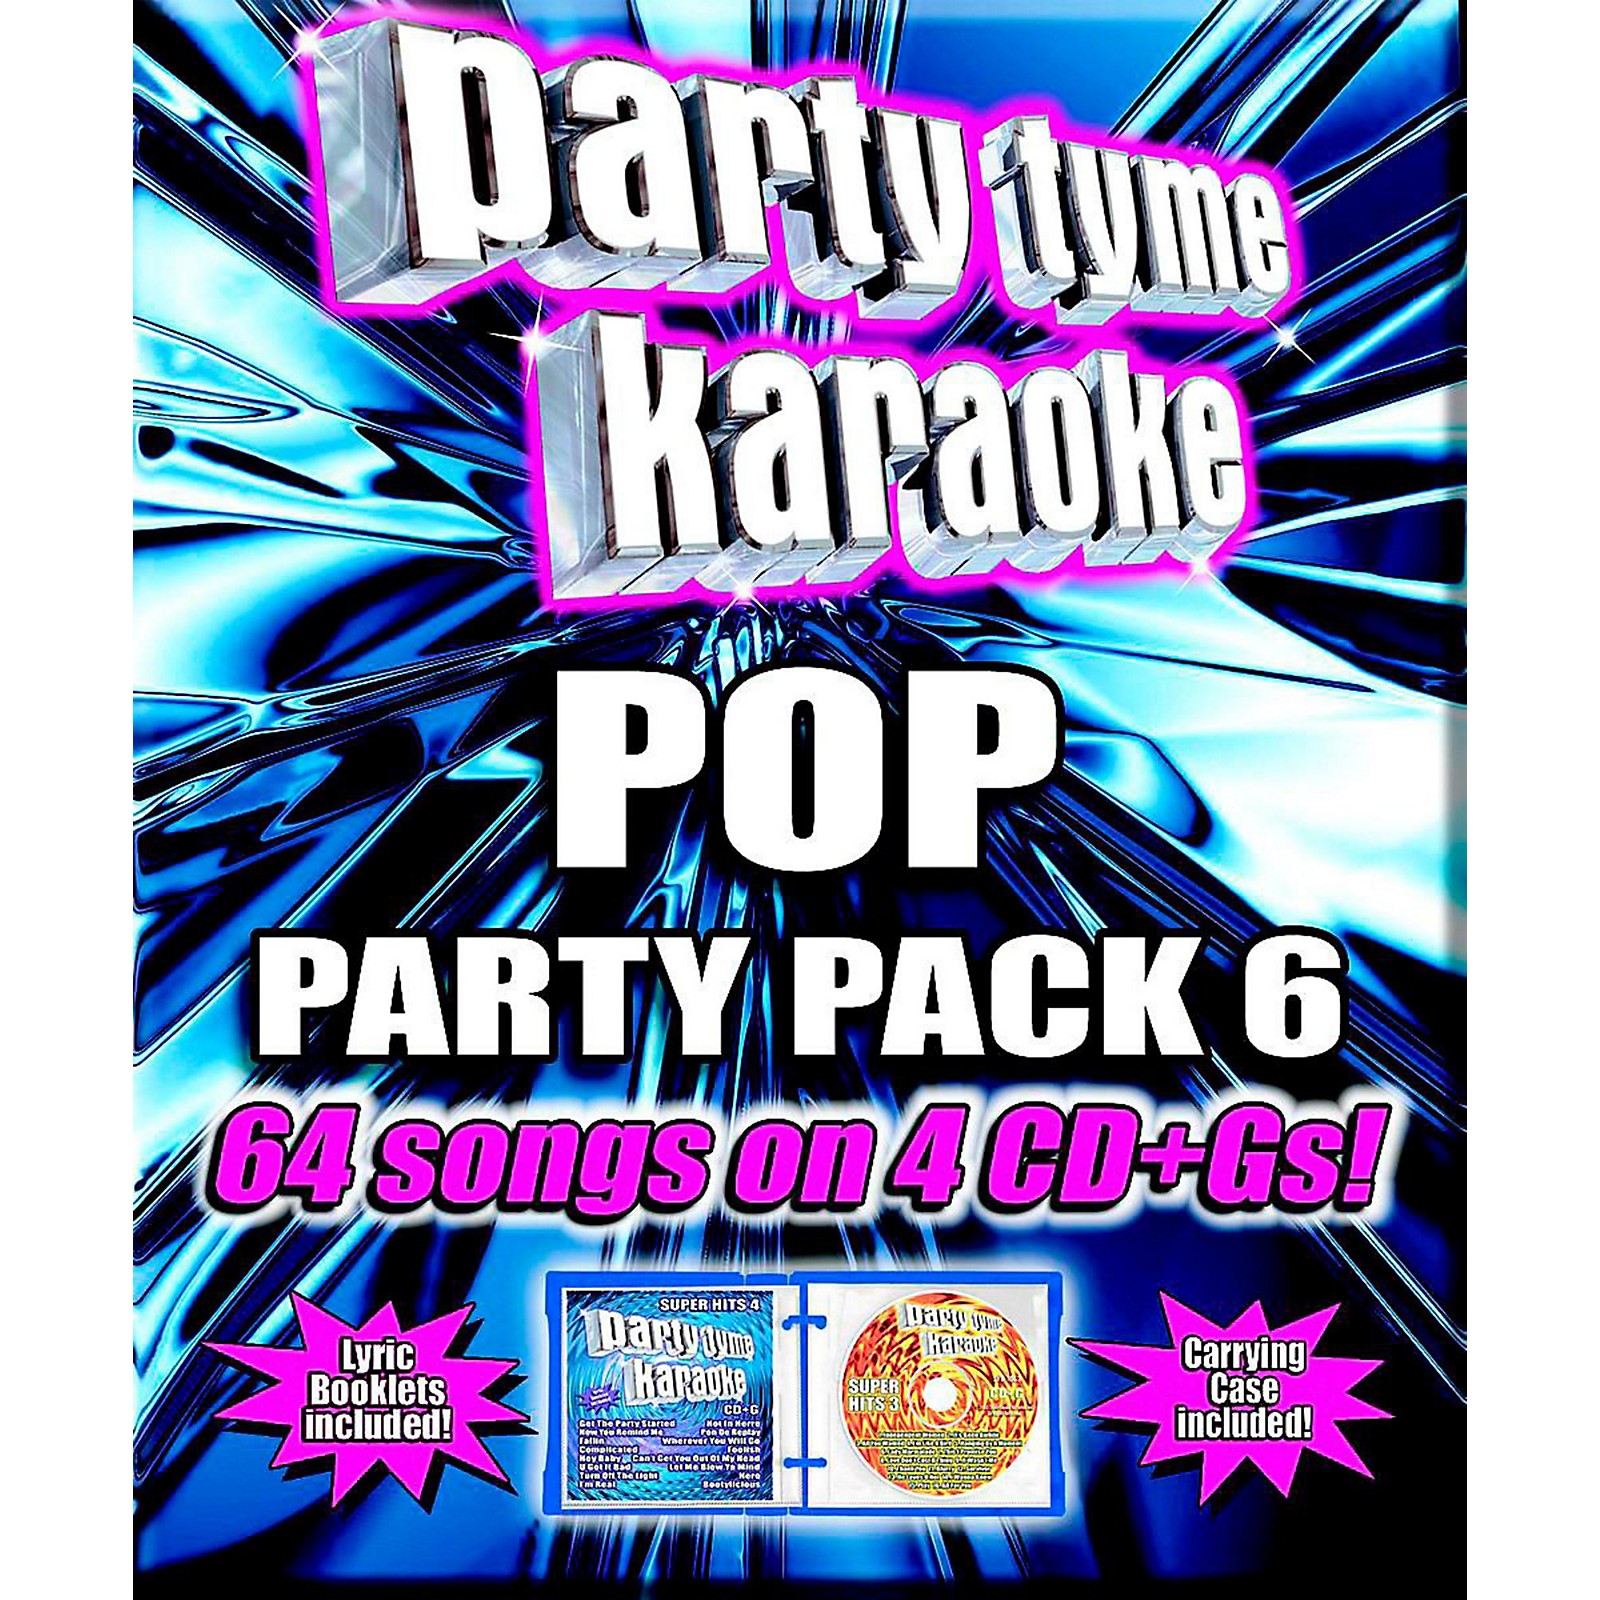 Clearance Sybersound Party Tyme Karaoke - Tween Party Pack 1